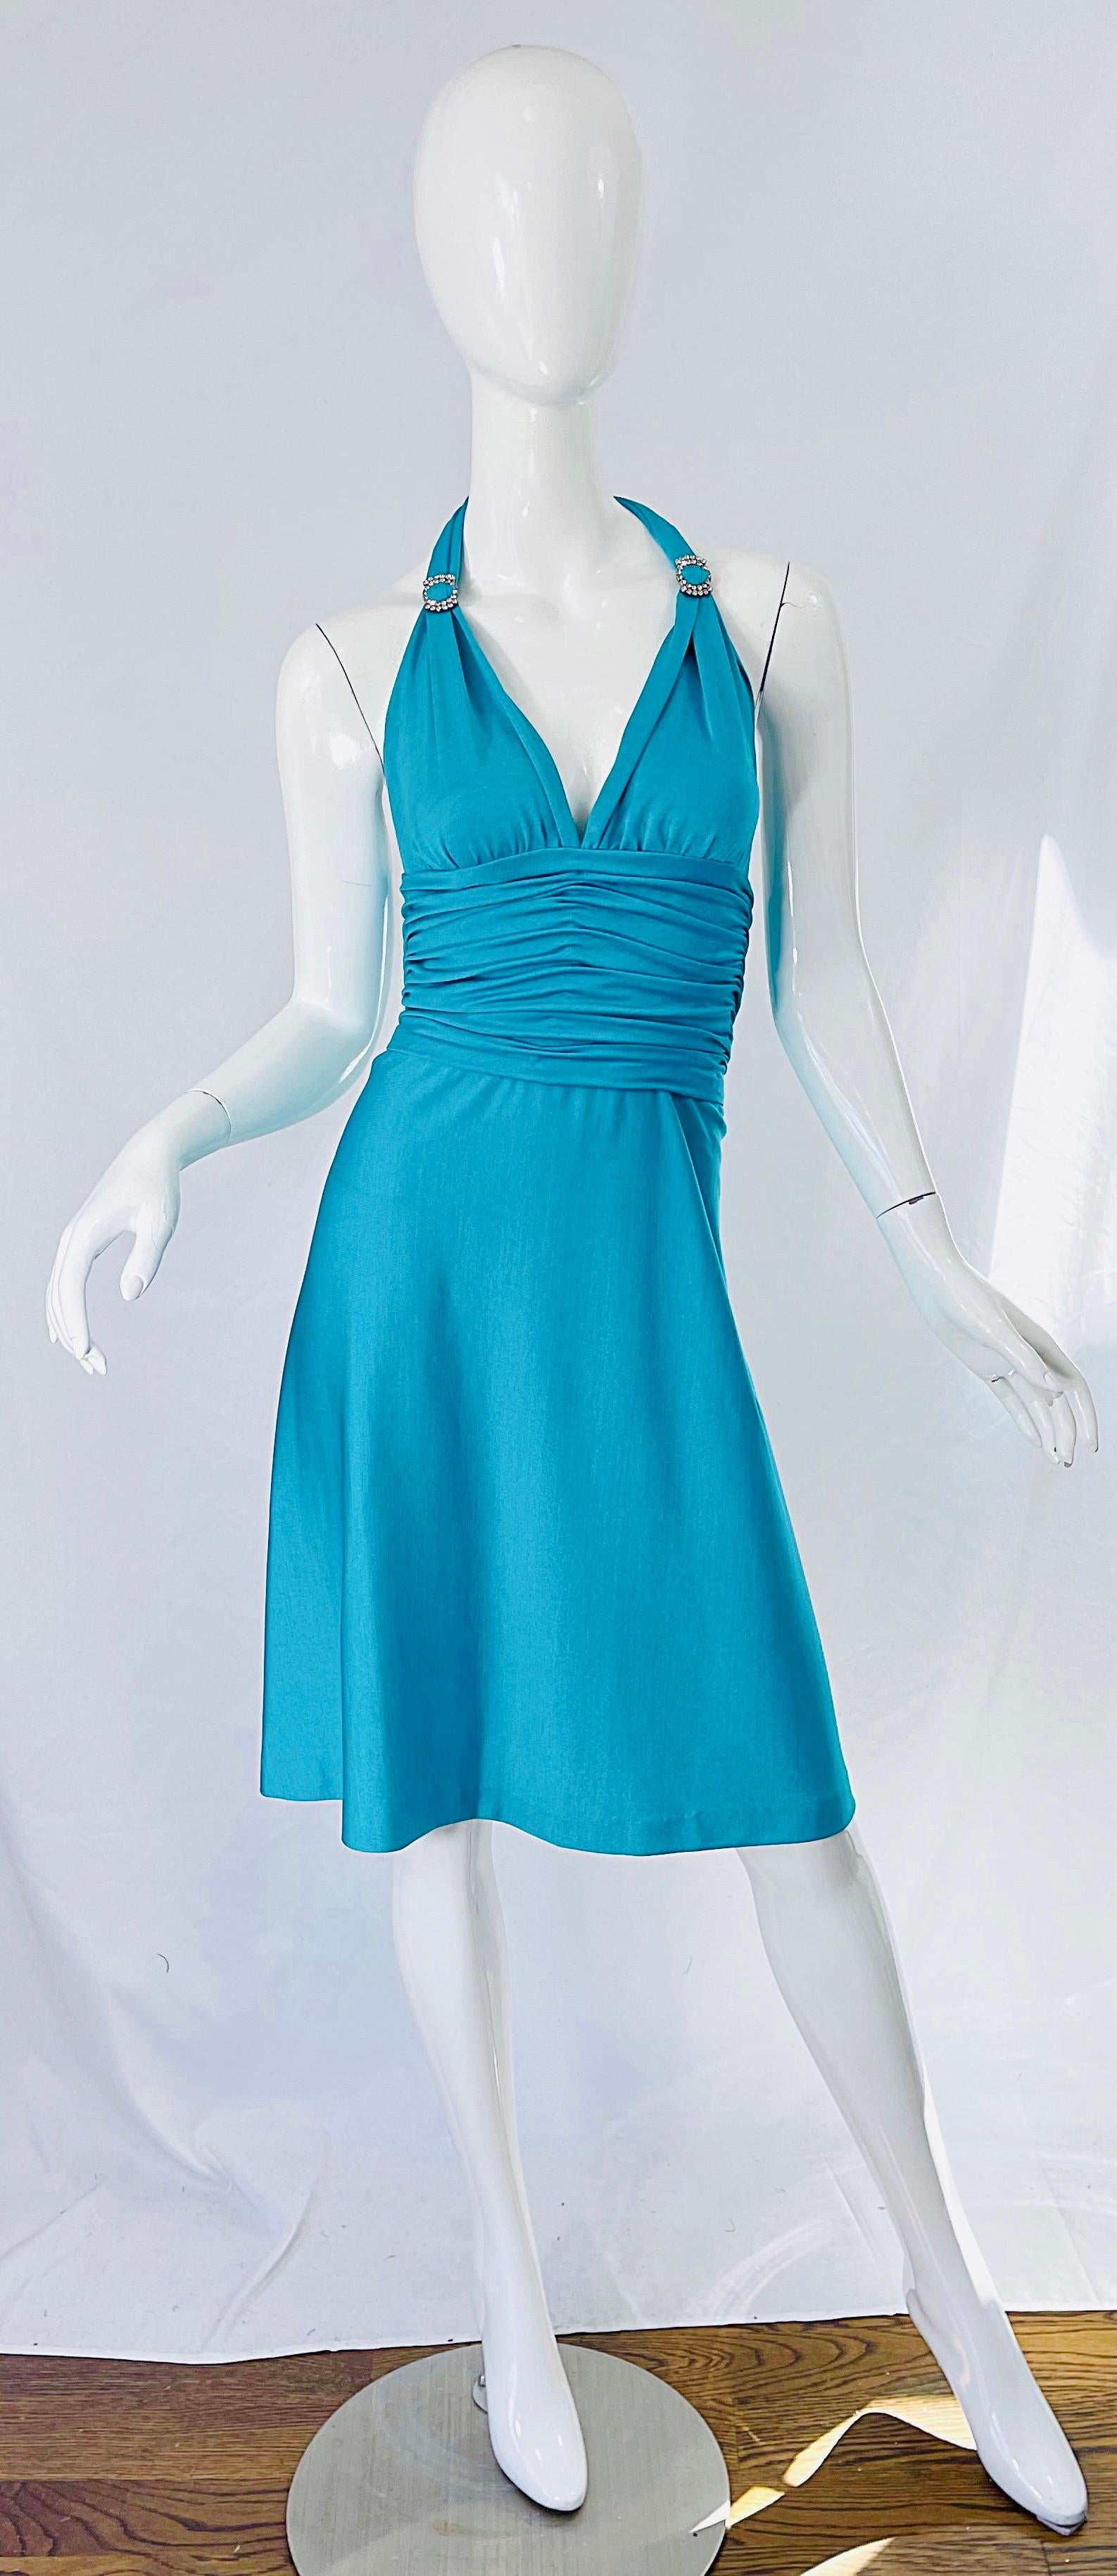 Sexy mid 70s LORIS AZZARO Couture turquoise blue silk jersey rhinestone encrusted halter dress ! The most beautiful jewel tone turquoise blue is flattering on any skin tone. Features a tailored bodice with ruched waist. Rhinestone buckles at each